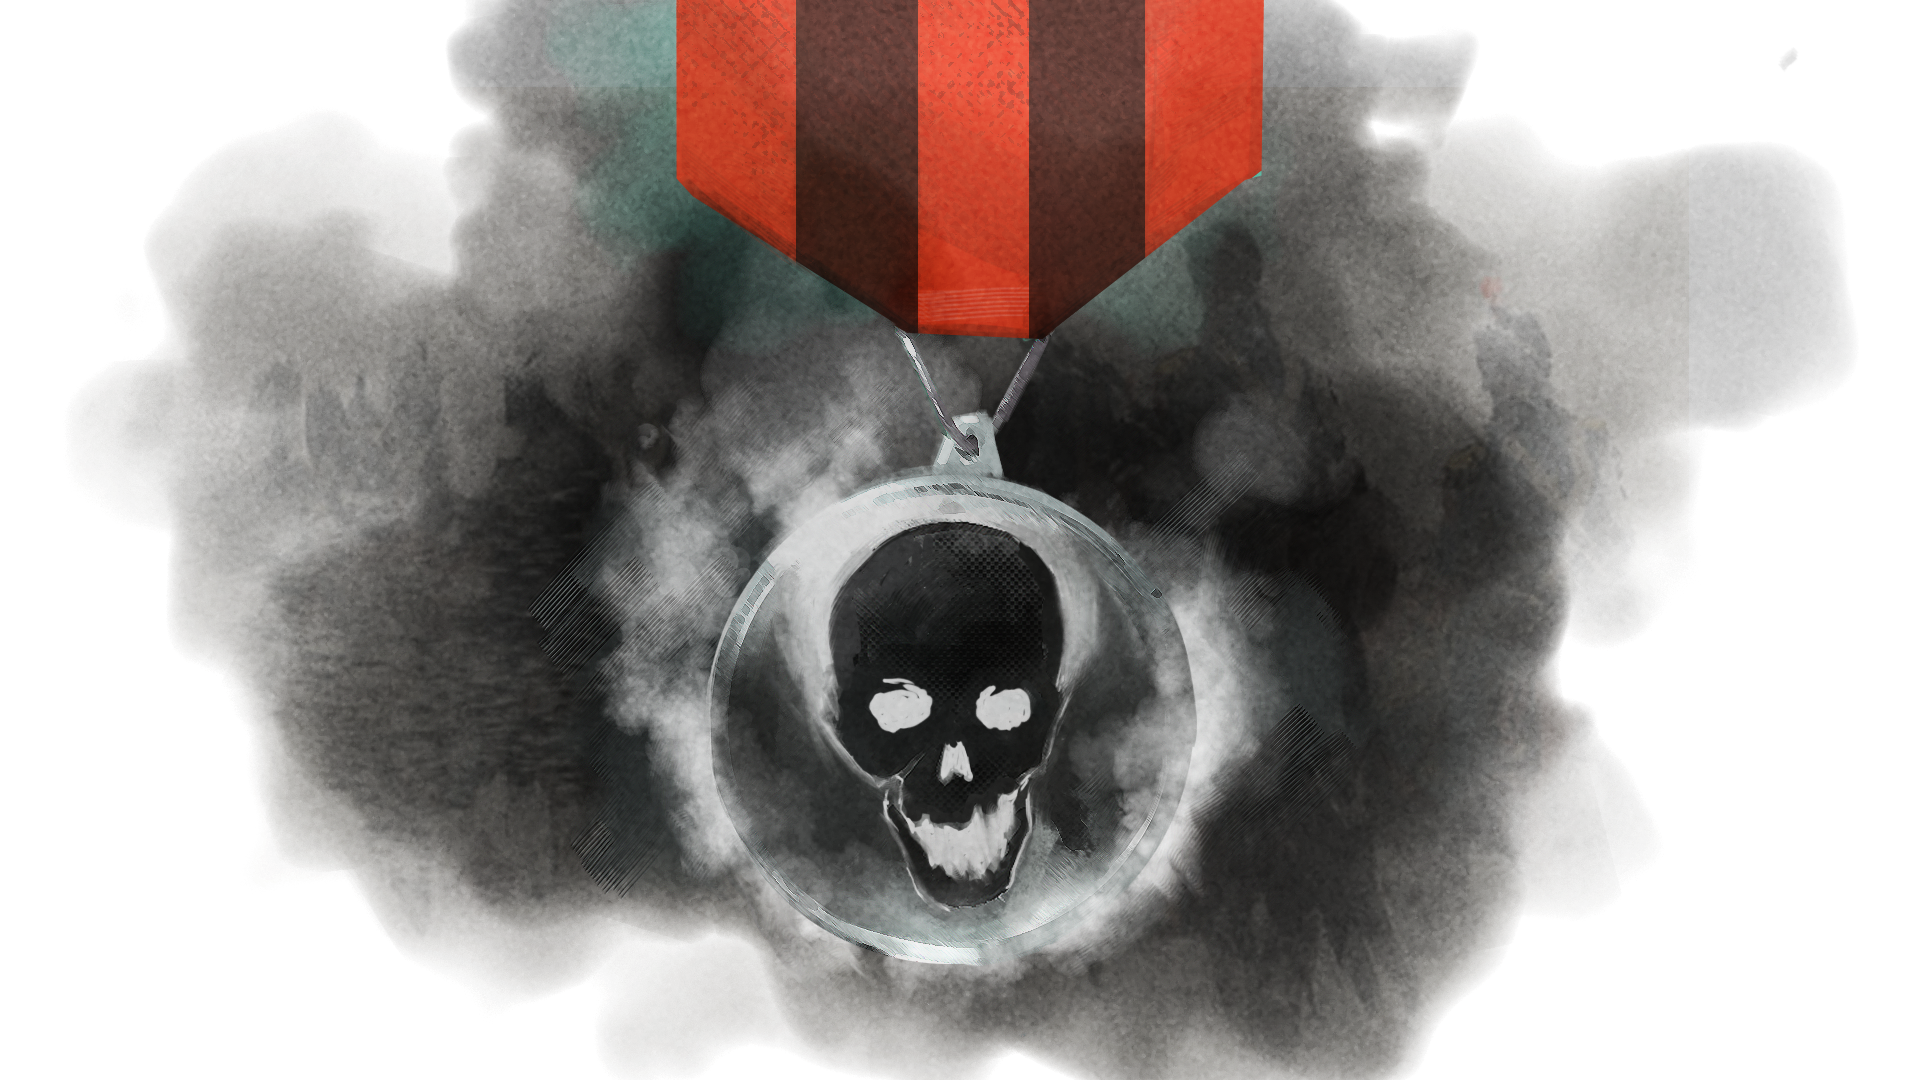 Icon for Master Of War